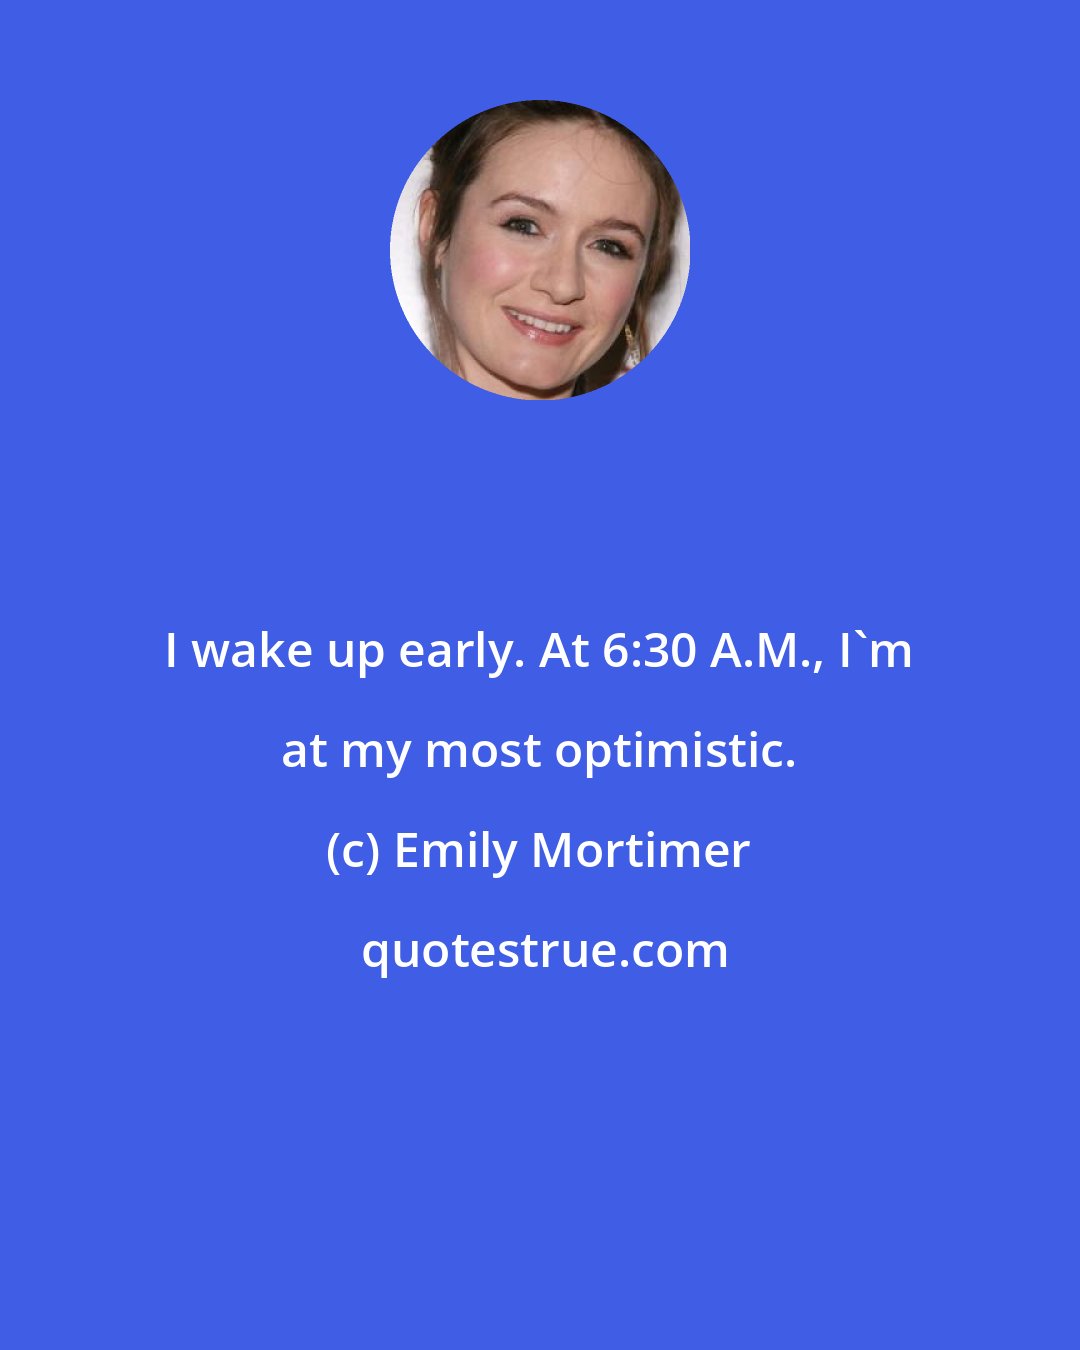 Emily Mortimer: I wake up early. At 6:30 A.M., I'm at my most optimistic.